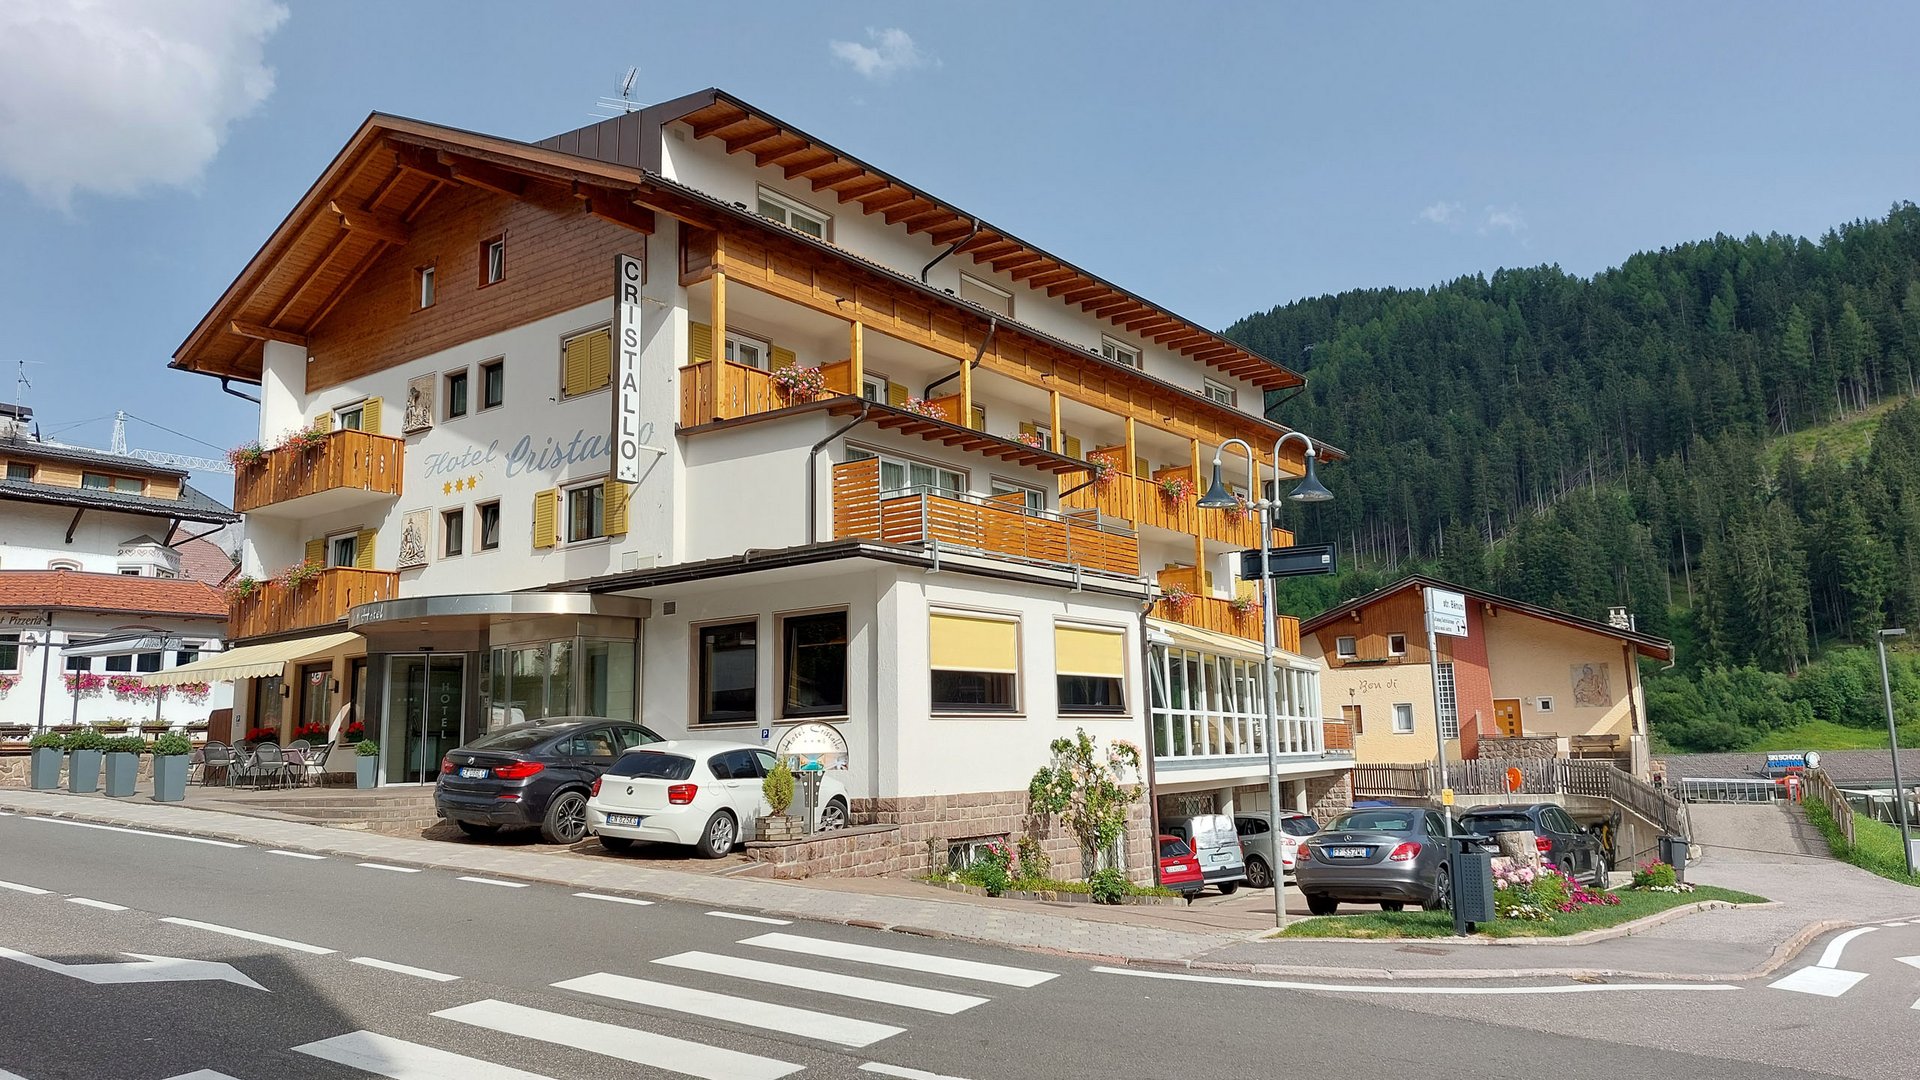 Hotel in St. Christina: the Dolomites within reach